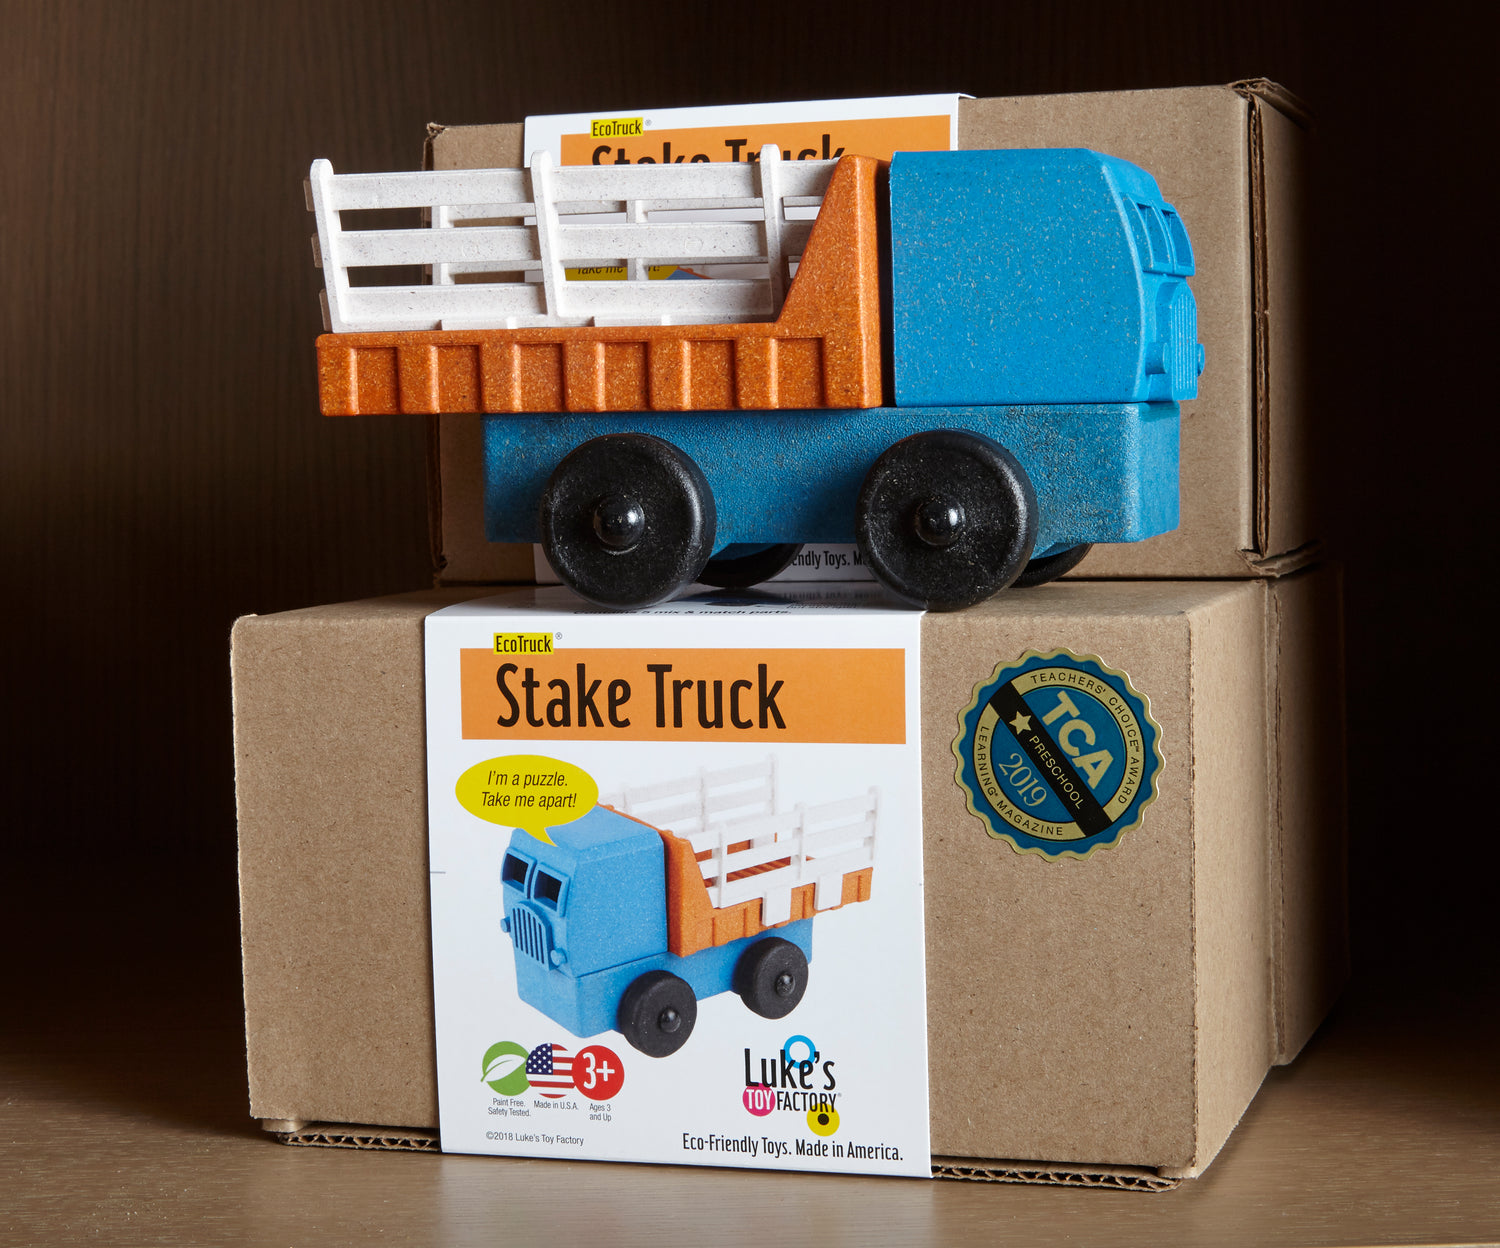 A preschool toy Stake Truck Toy sits on its cardboard box packaging on a gift store shelf